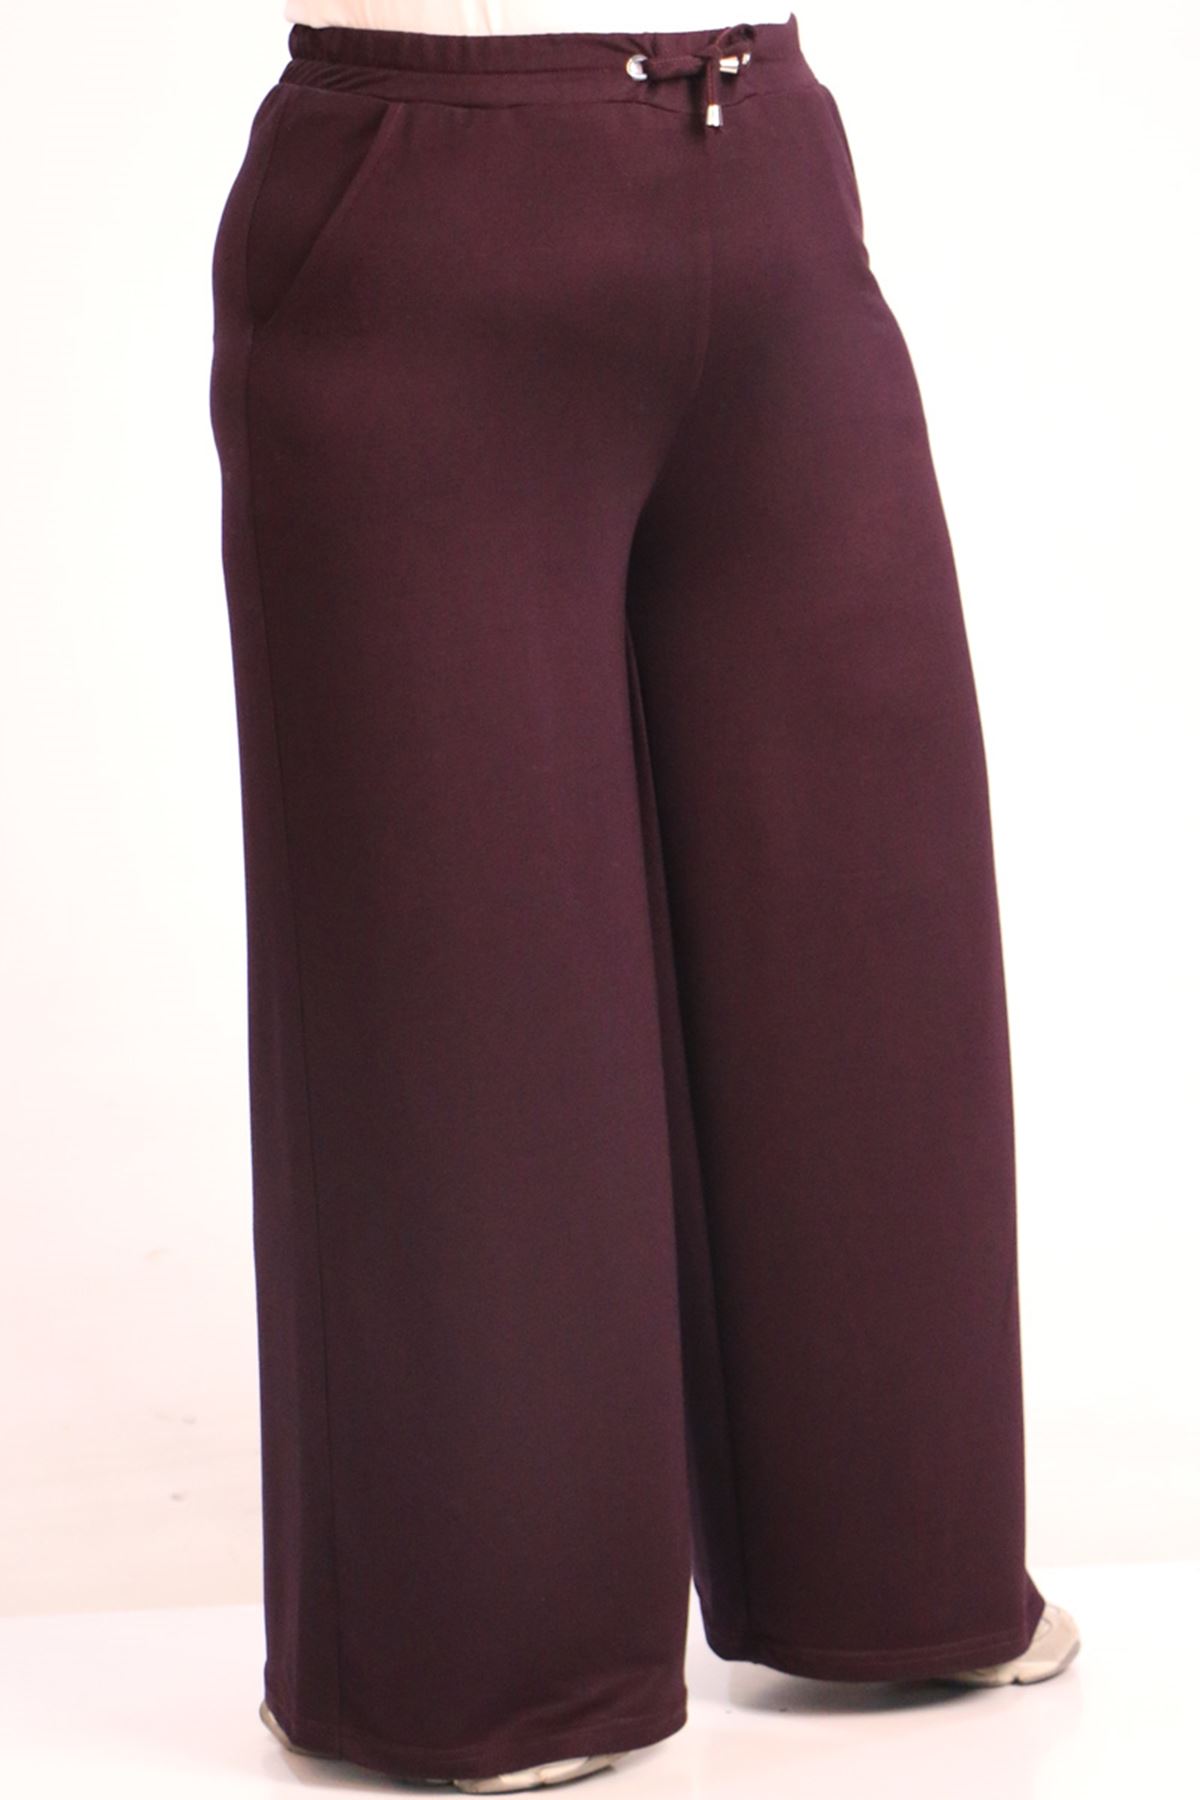 39502 Large Size Crystal Two Thread Trousers with Elastic Back - Plum